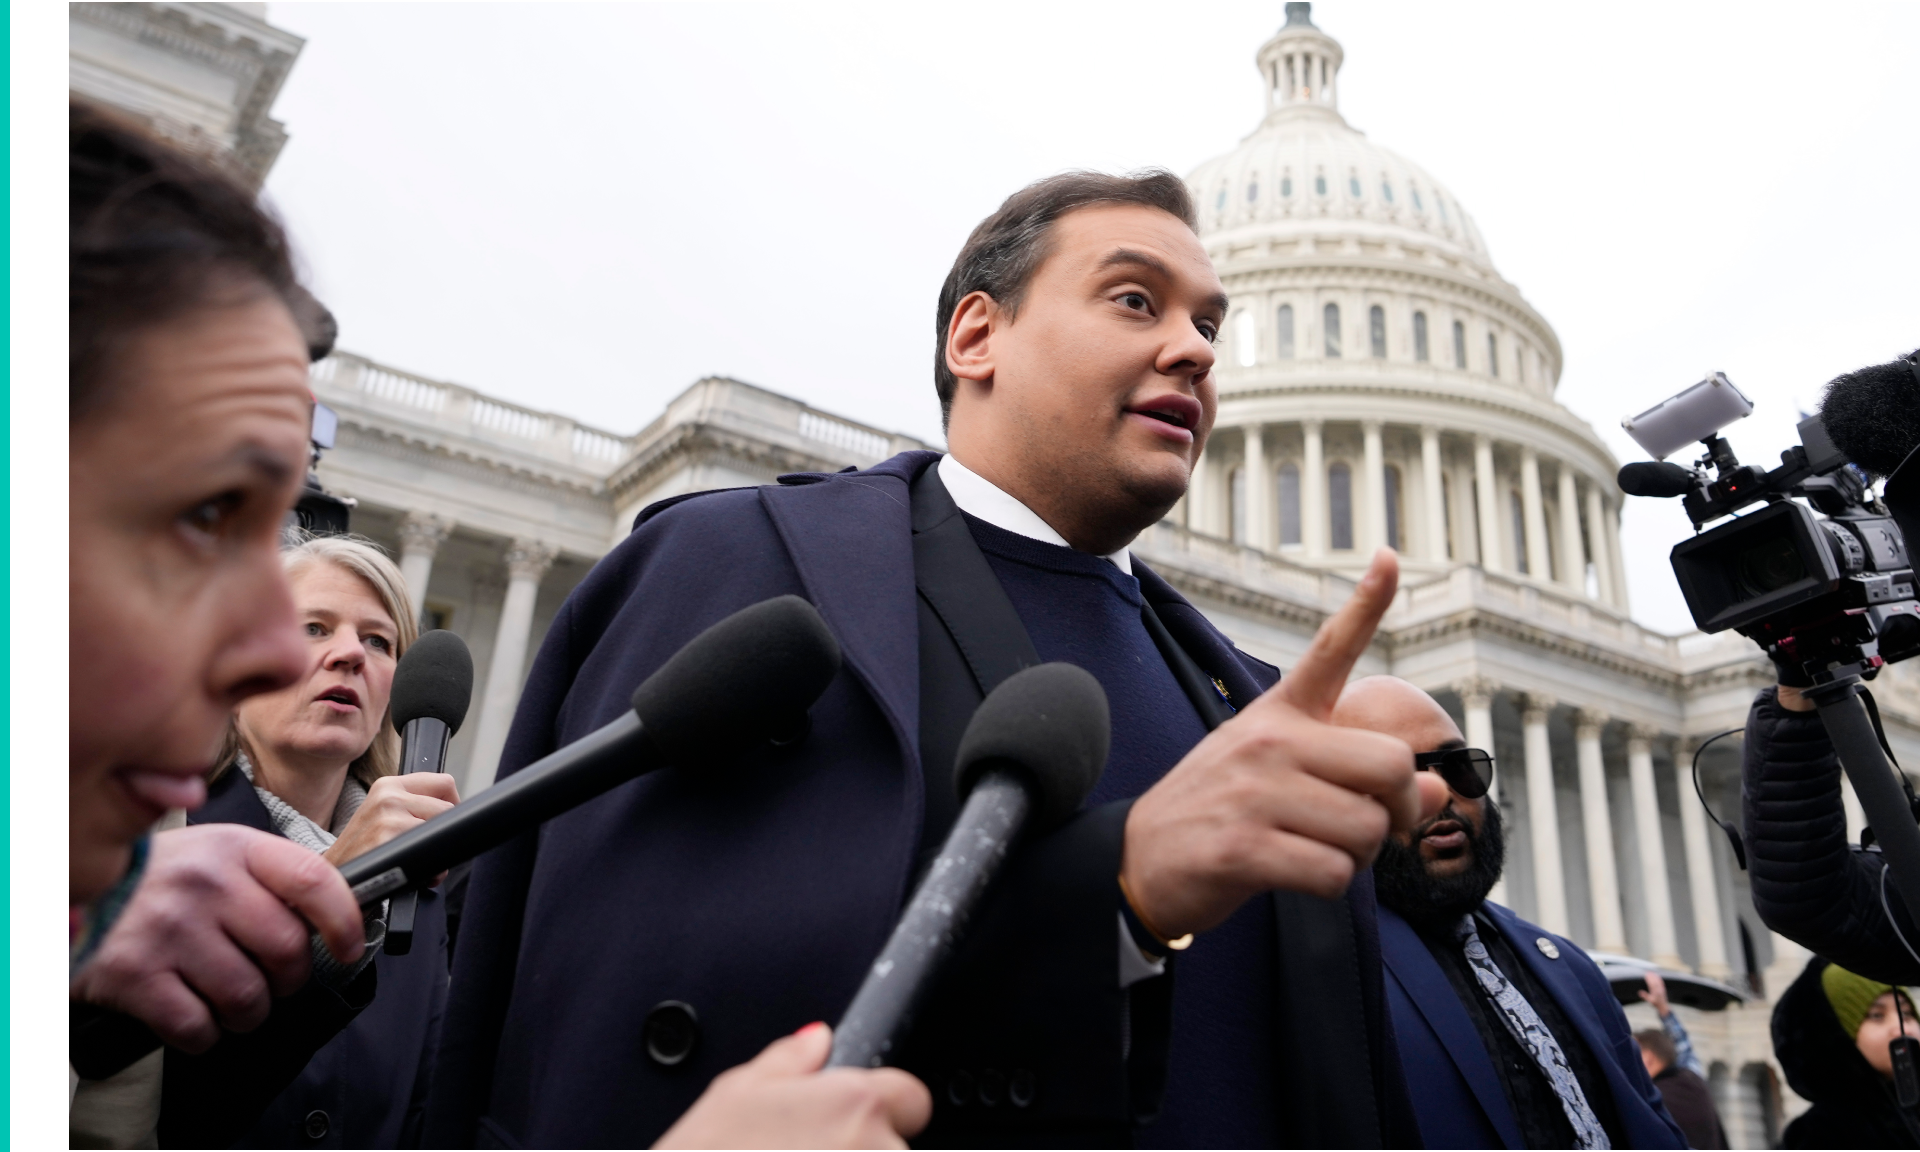 Rep. George Santos (R-NY) is surrounded by journalists as he leaves the U.S. Capitol after his fellow members of Congress voted to expel him from the House of Representatives 